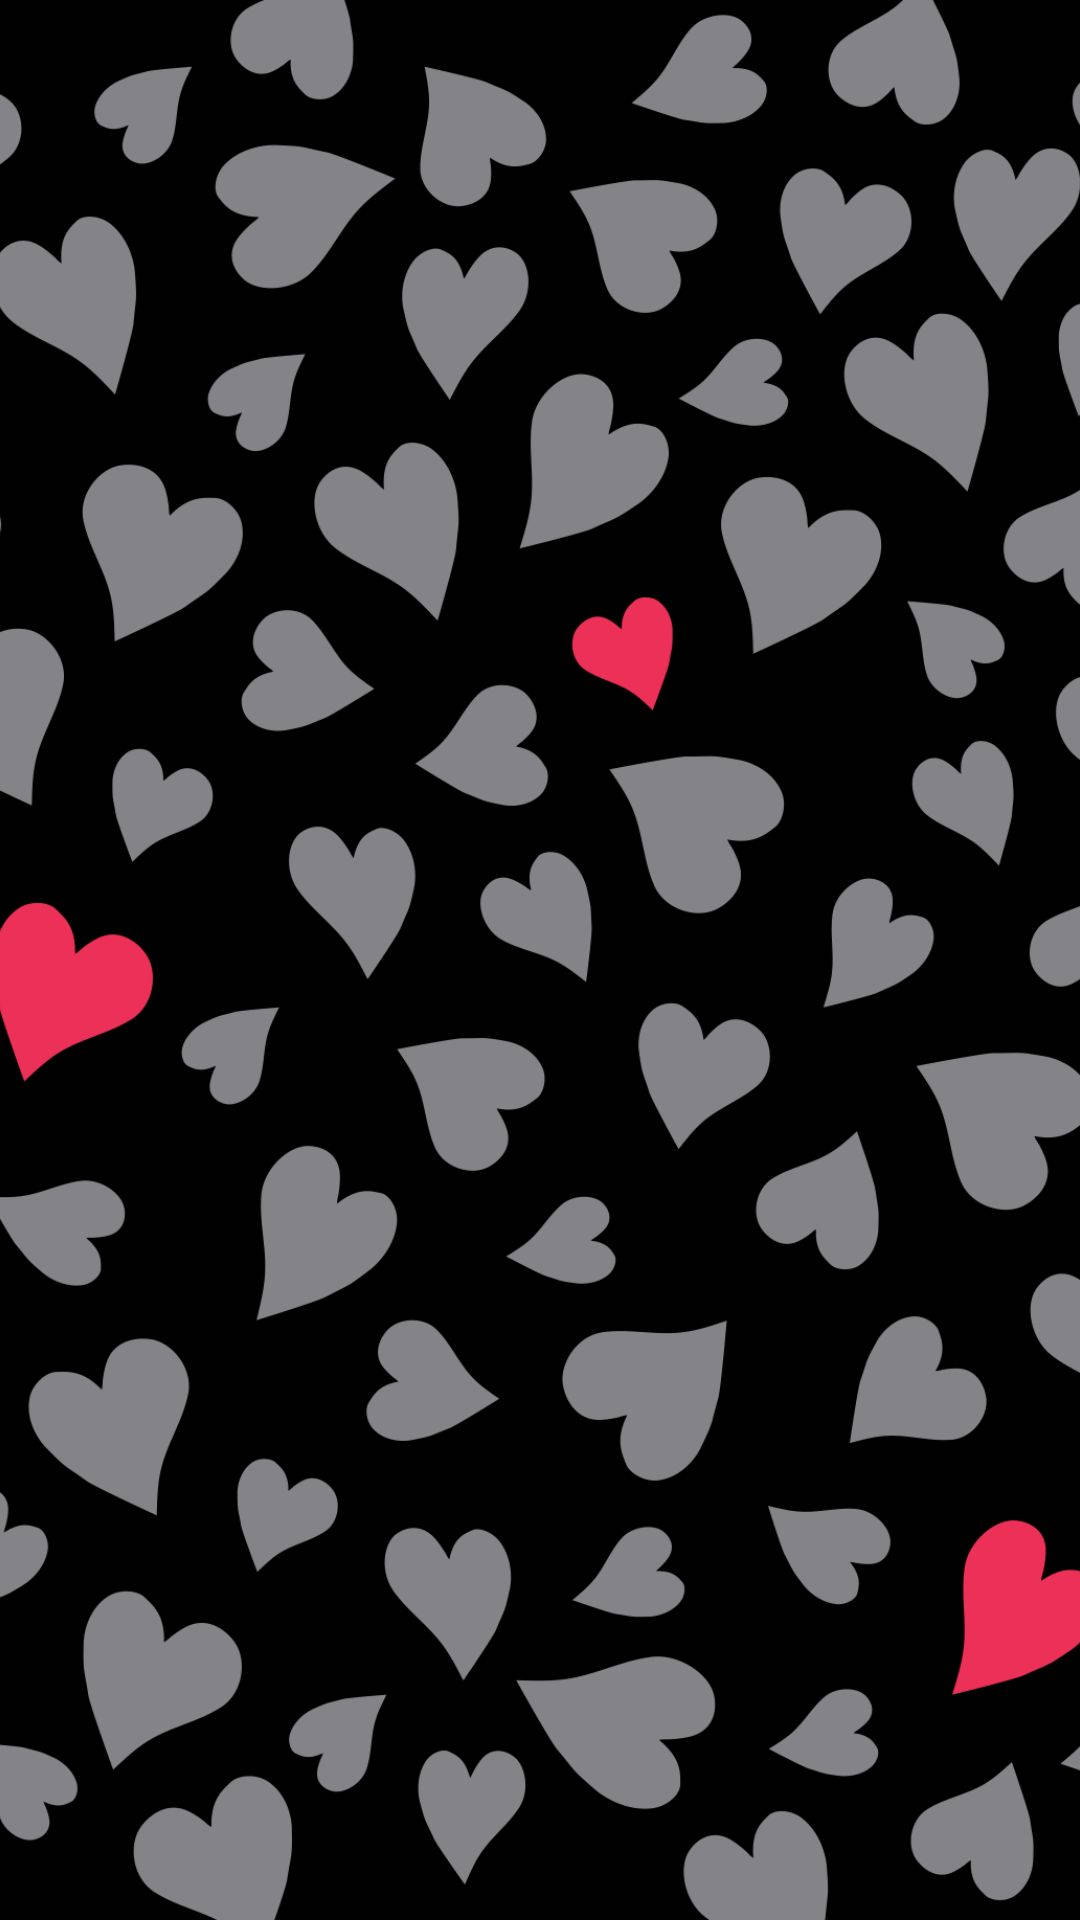 Caption: Dark Mystique - A Dance of Black and Red Hearts Wallpaper